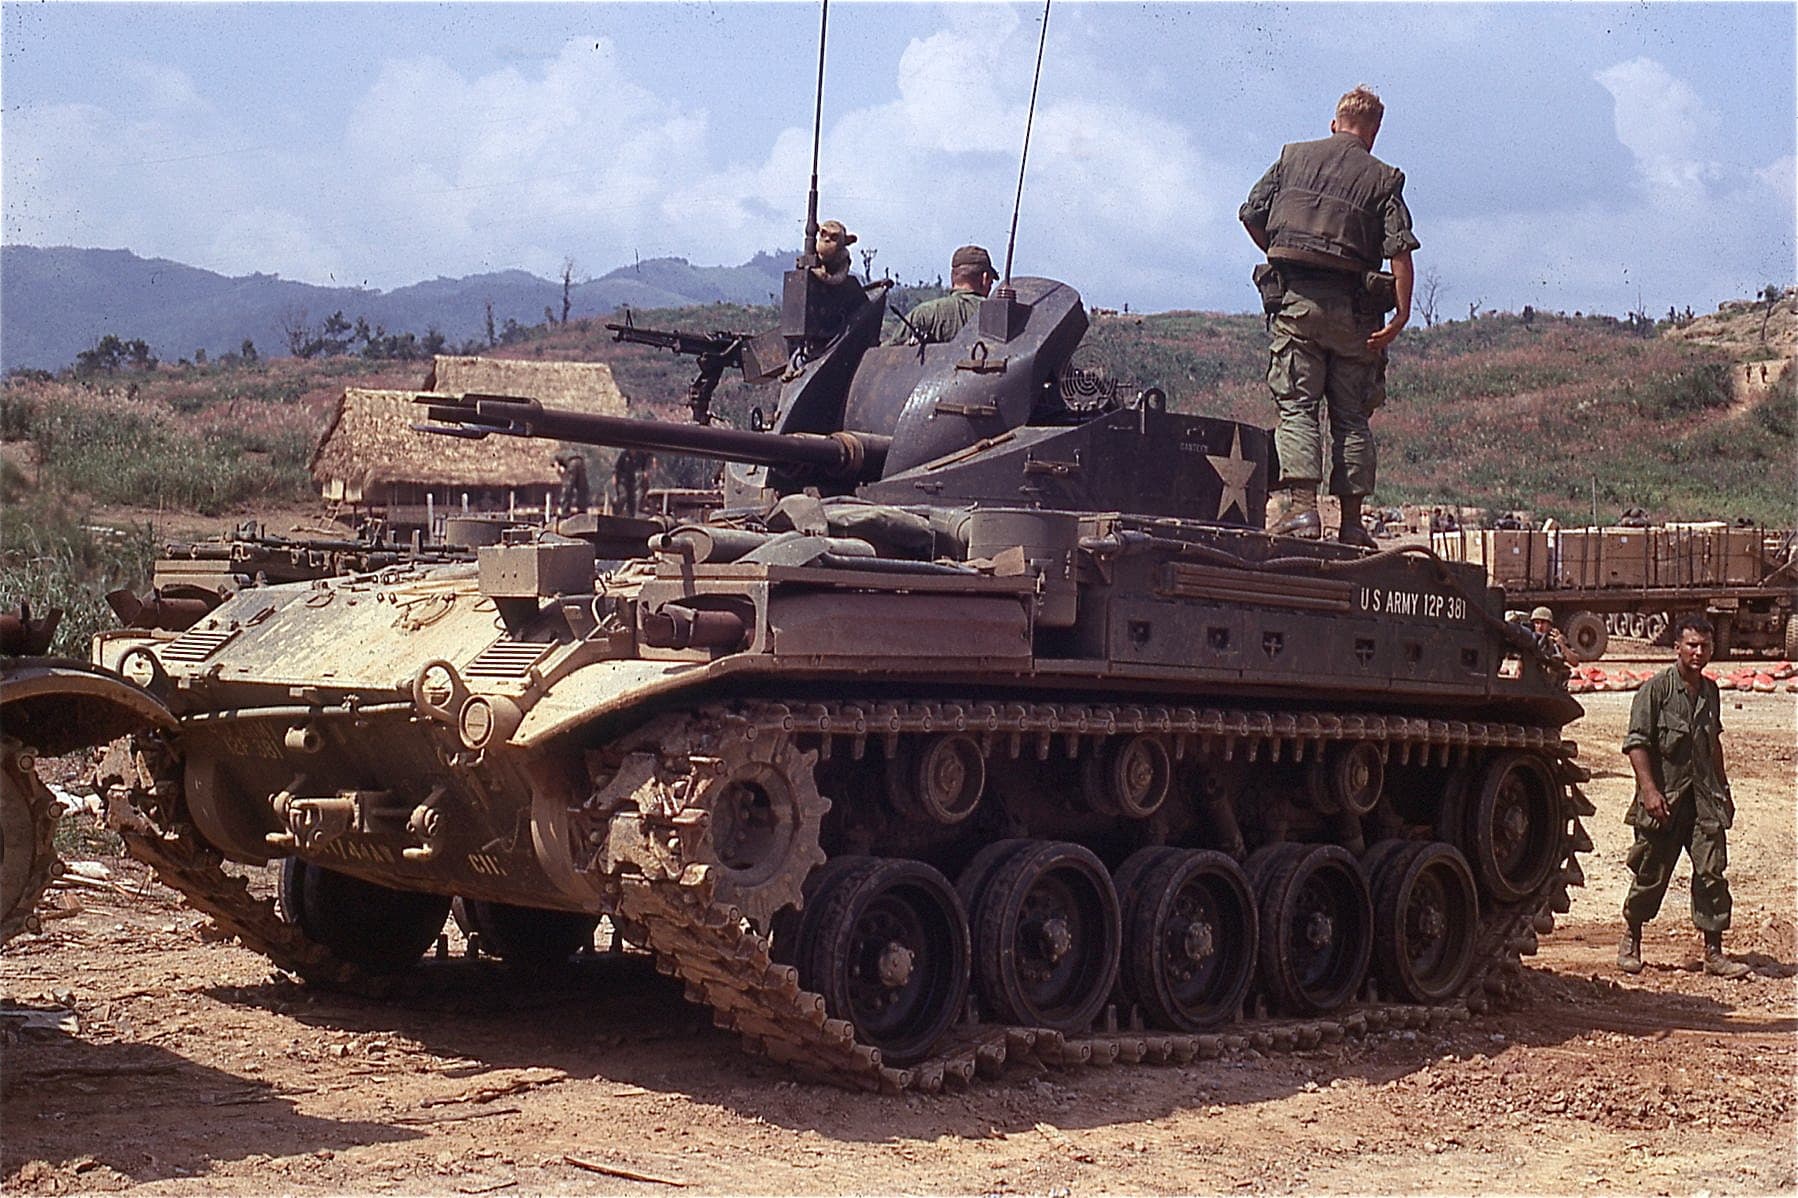 An Image of the M42 Duster, a relic of the Korean War.